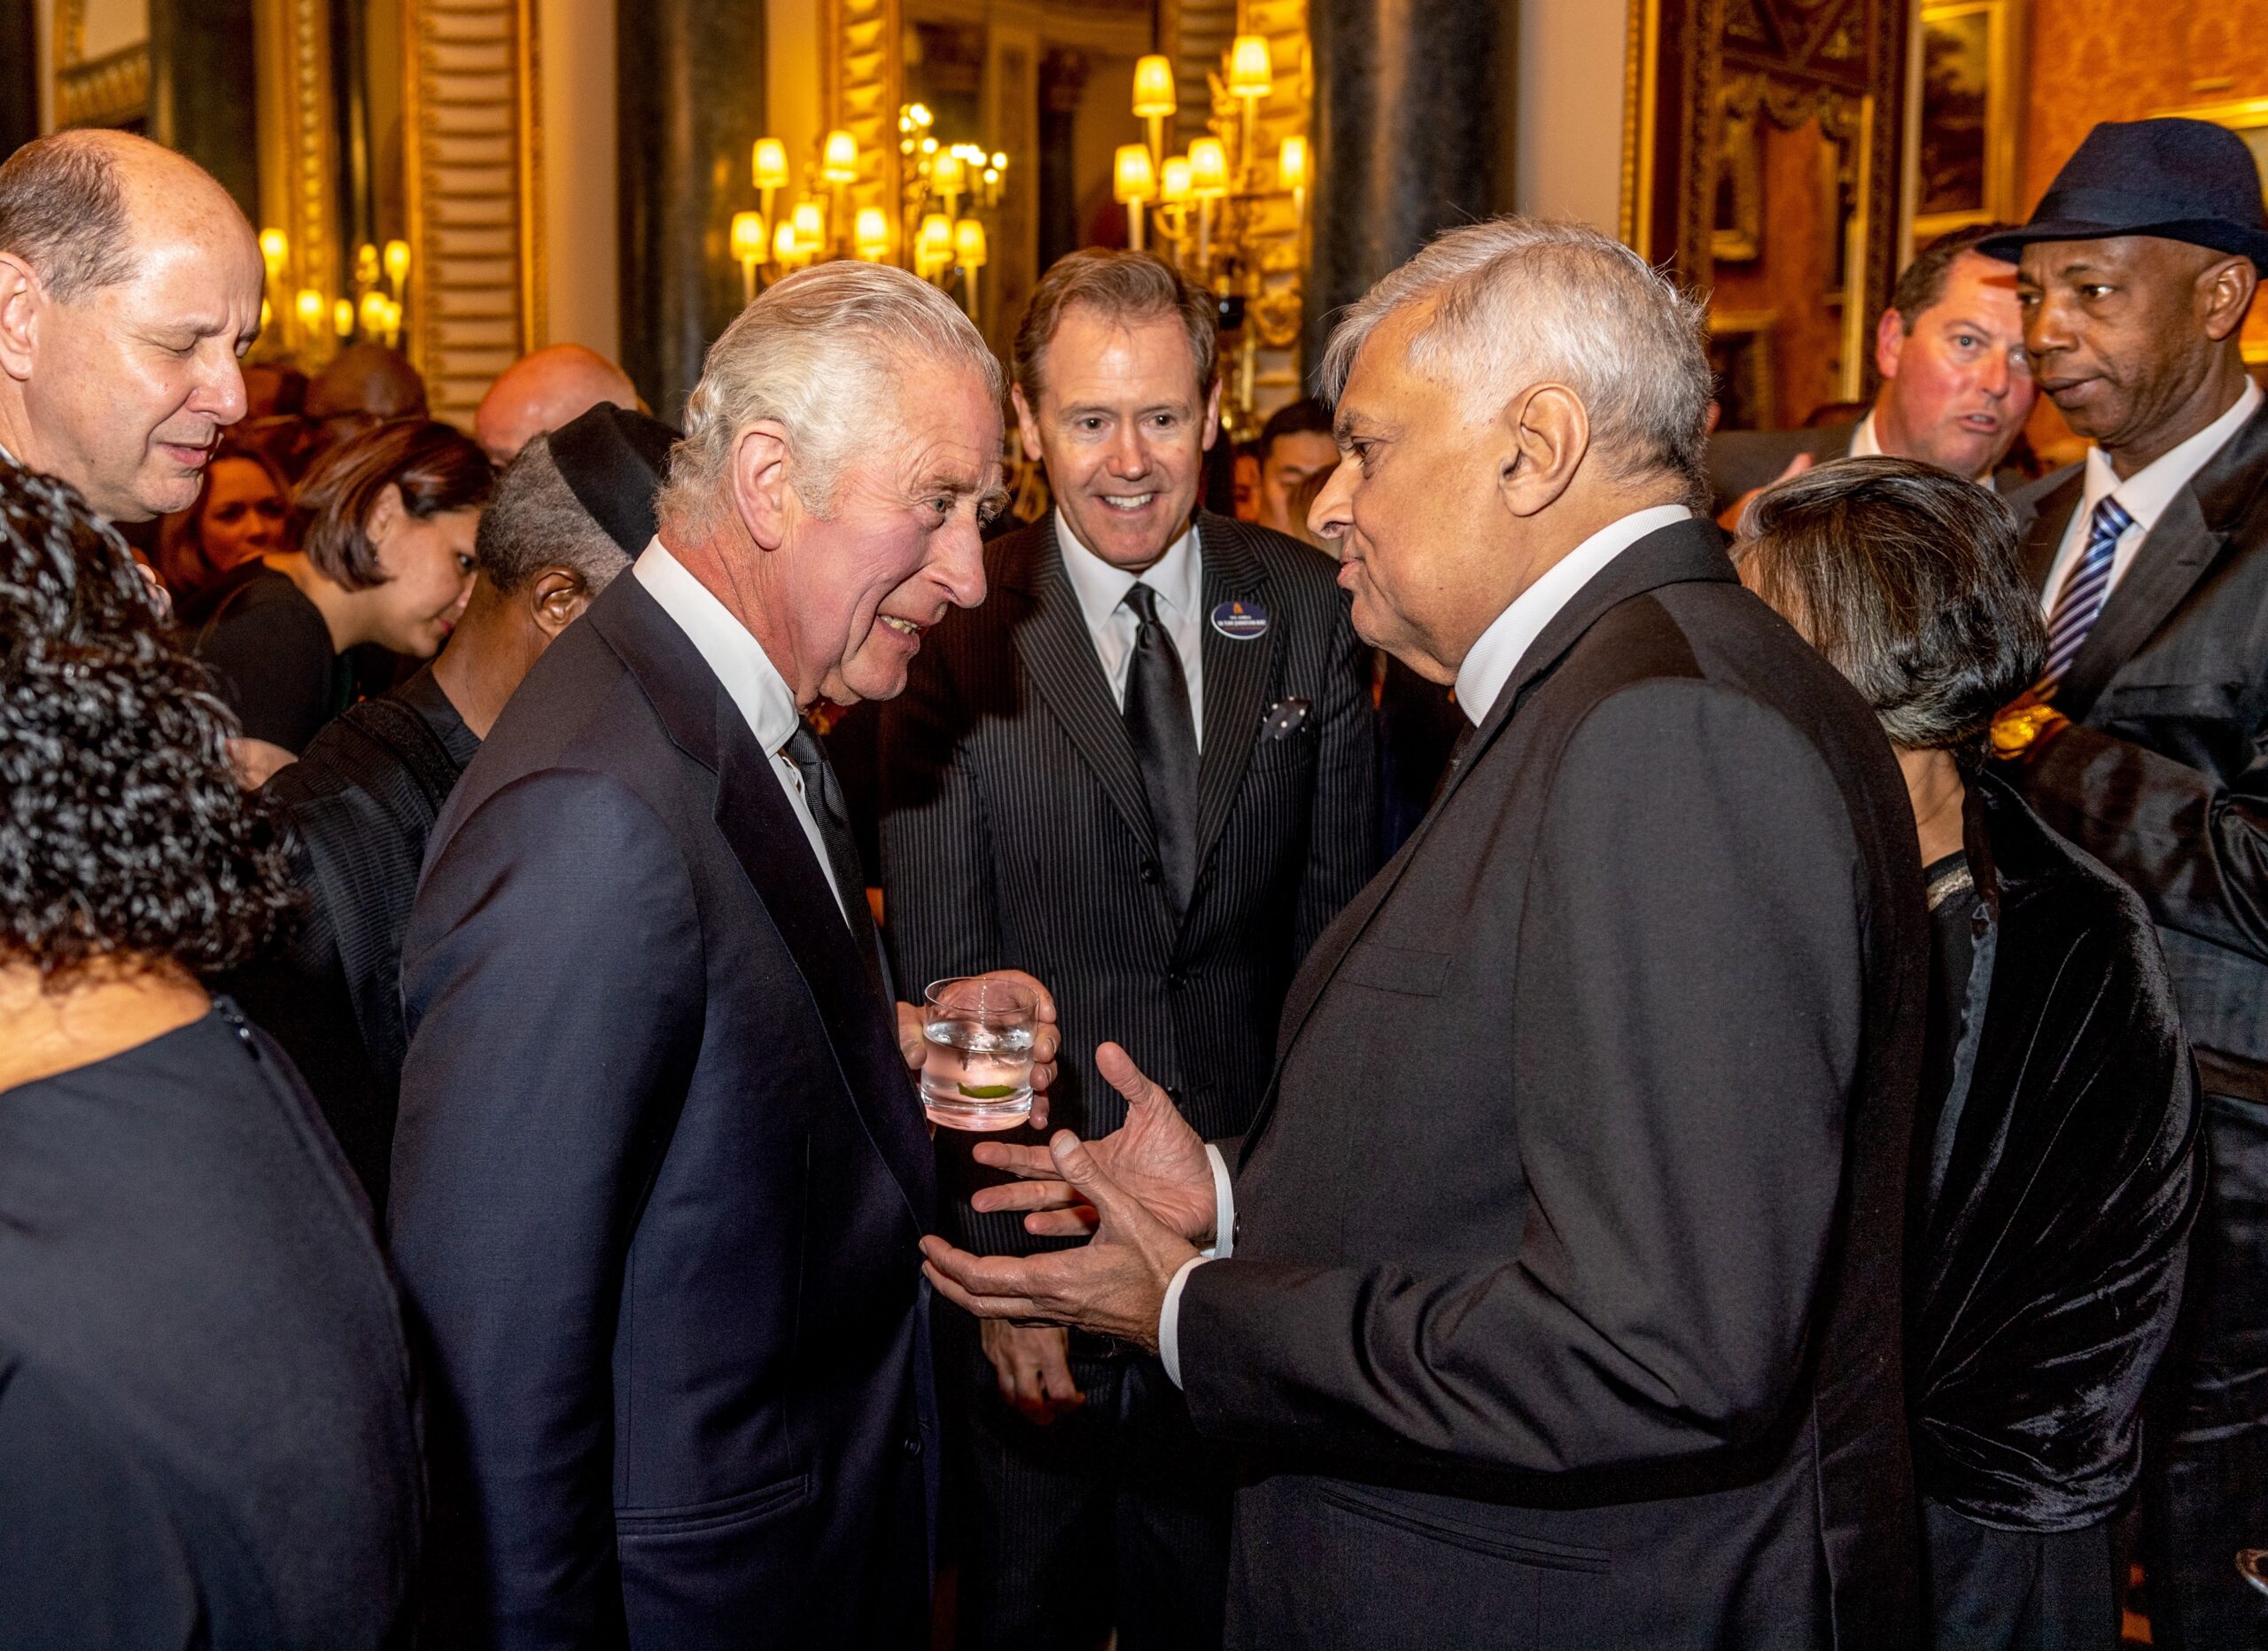 President Ranil Wickremesinghe engaged in cordial conversation with King Charles III